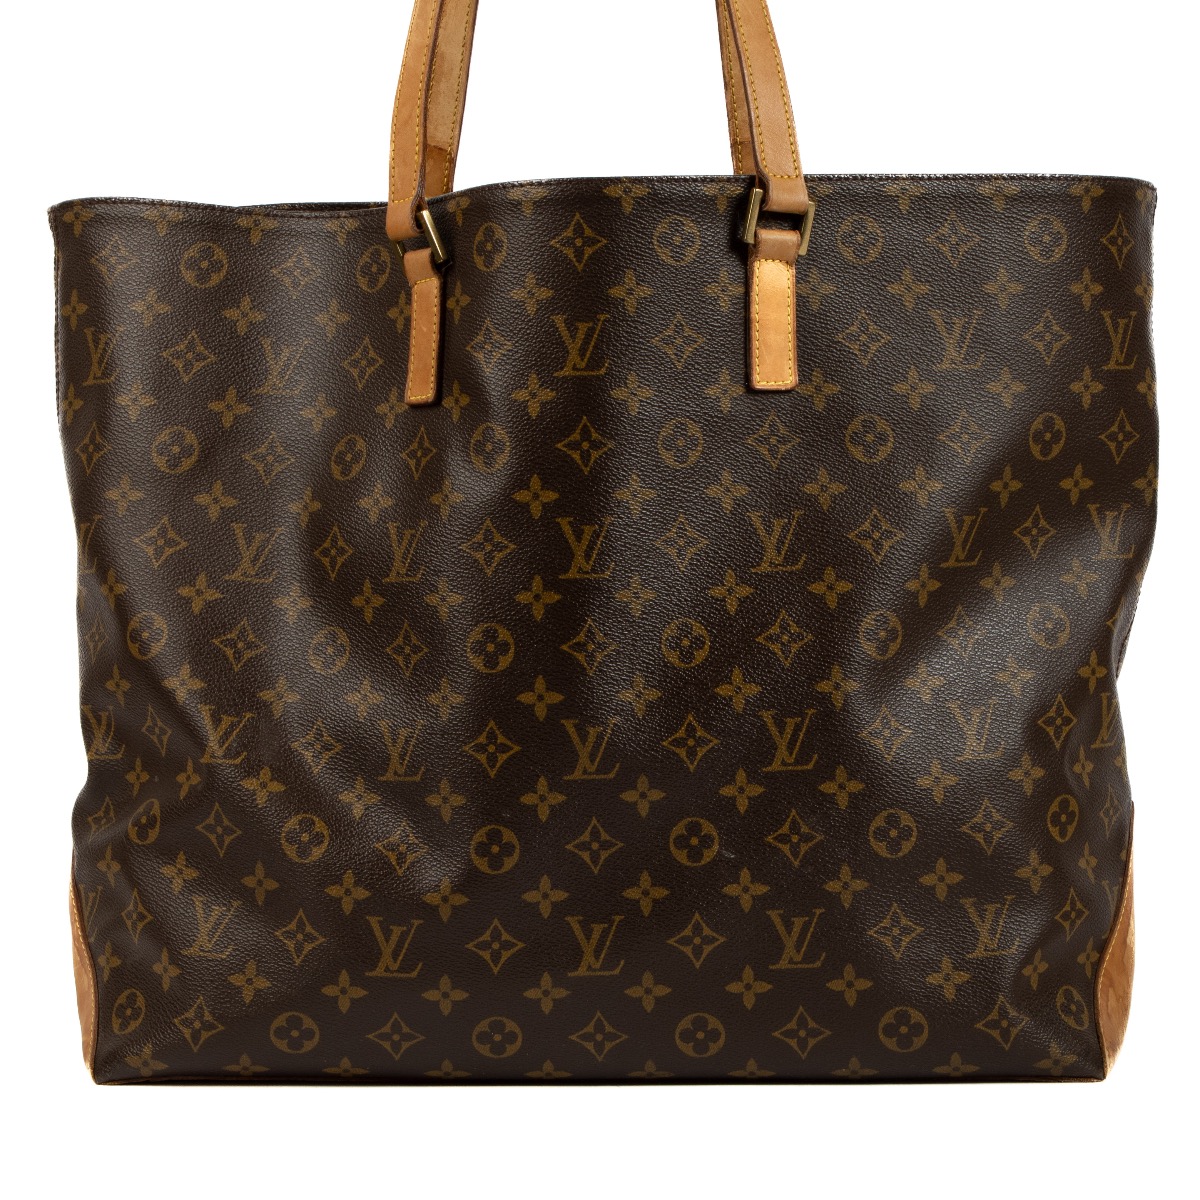 Louis Vuitton - Authenticated Favorite Handbag - Cloth Brown for Women, Very Good Condition